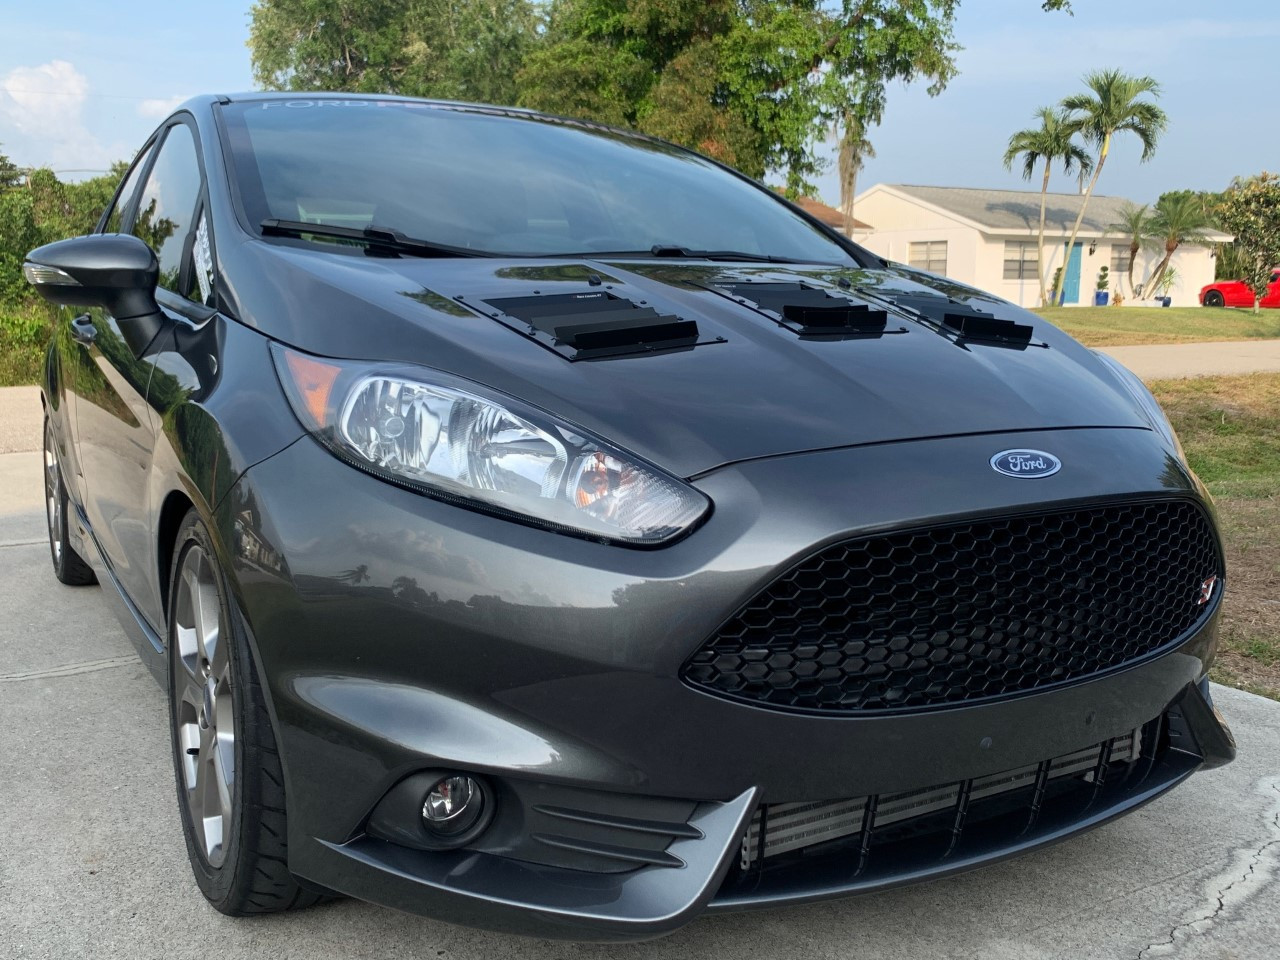 Race Louver Fiesta ST RT trim center car hood vent designed for street, high performance driving and light track duty.